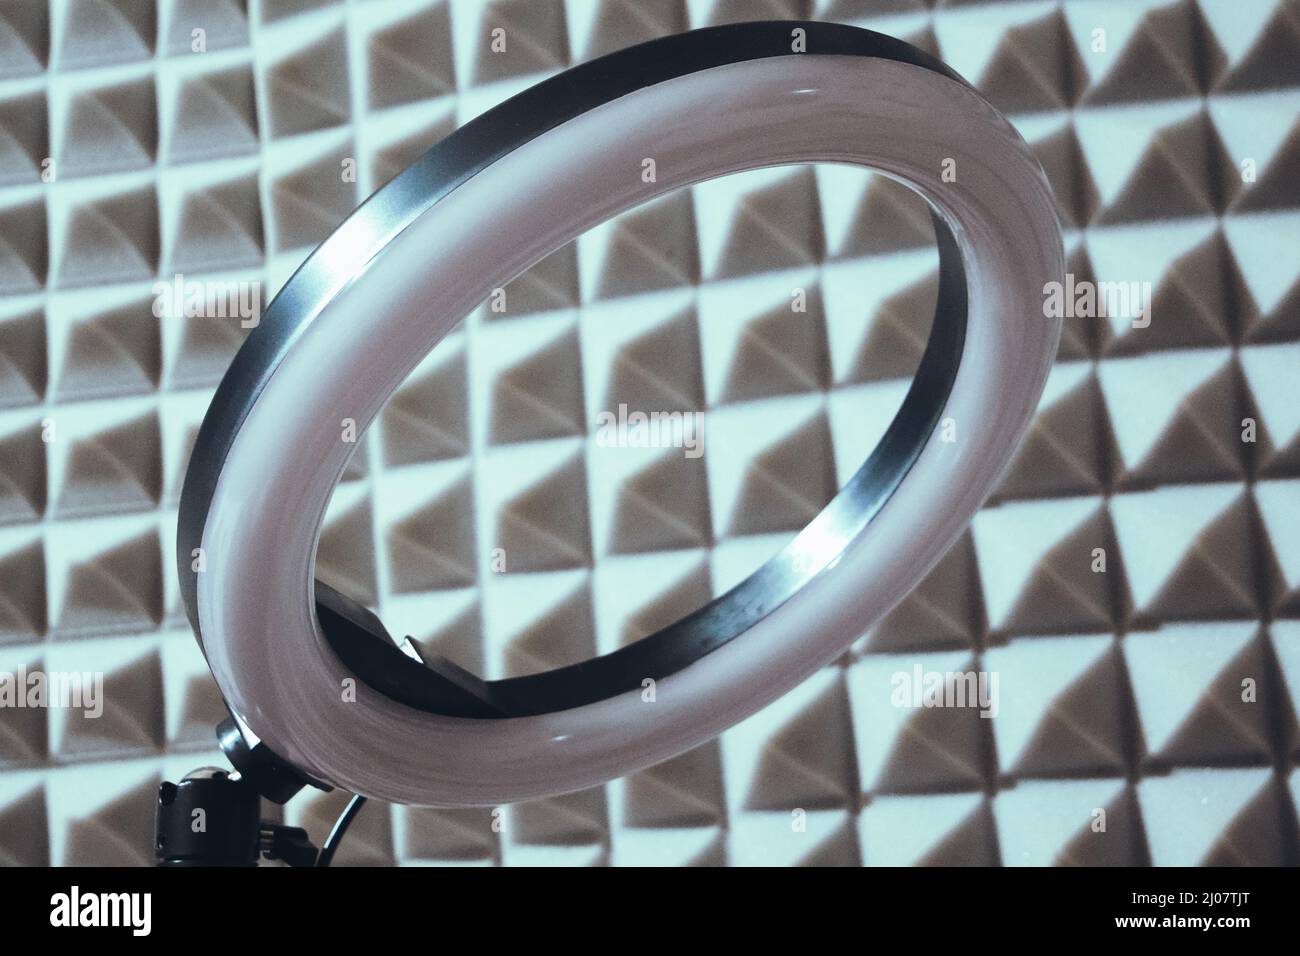 Ring RGB lamp on the background of sound-proof foam rubber. Stock Photo